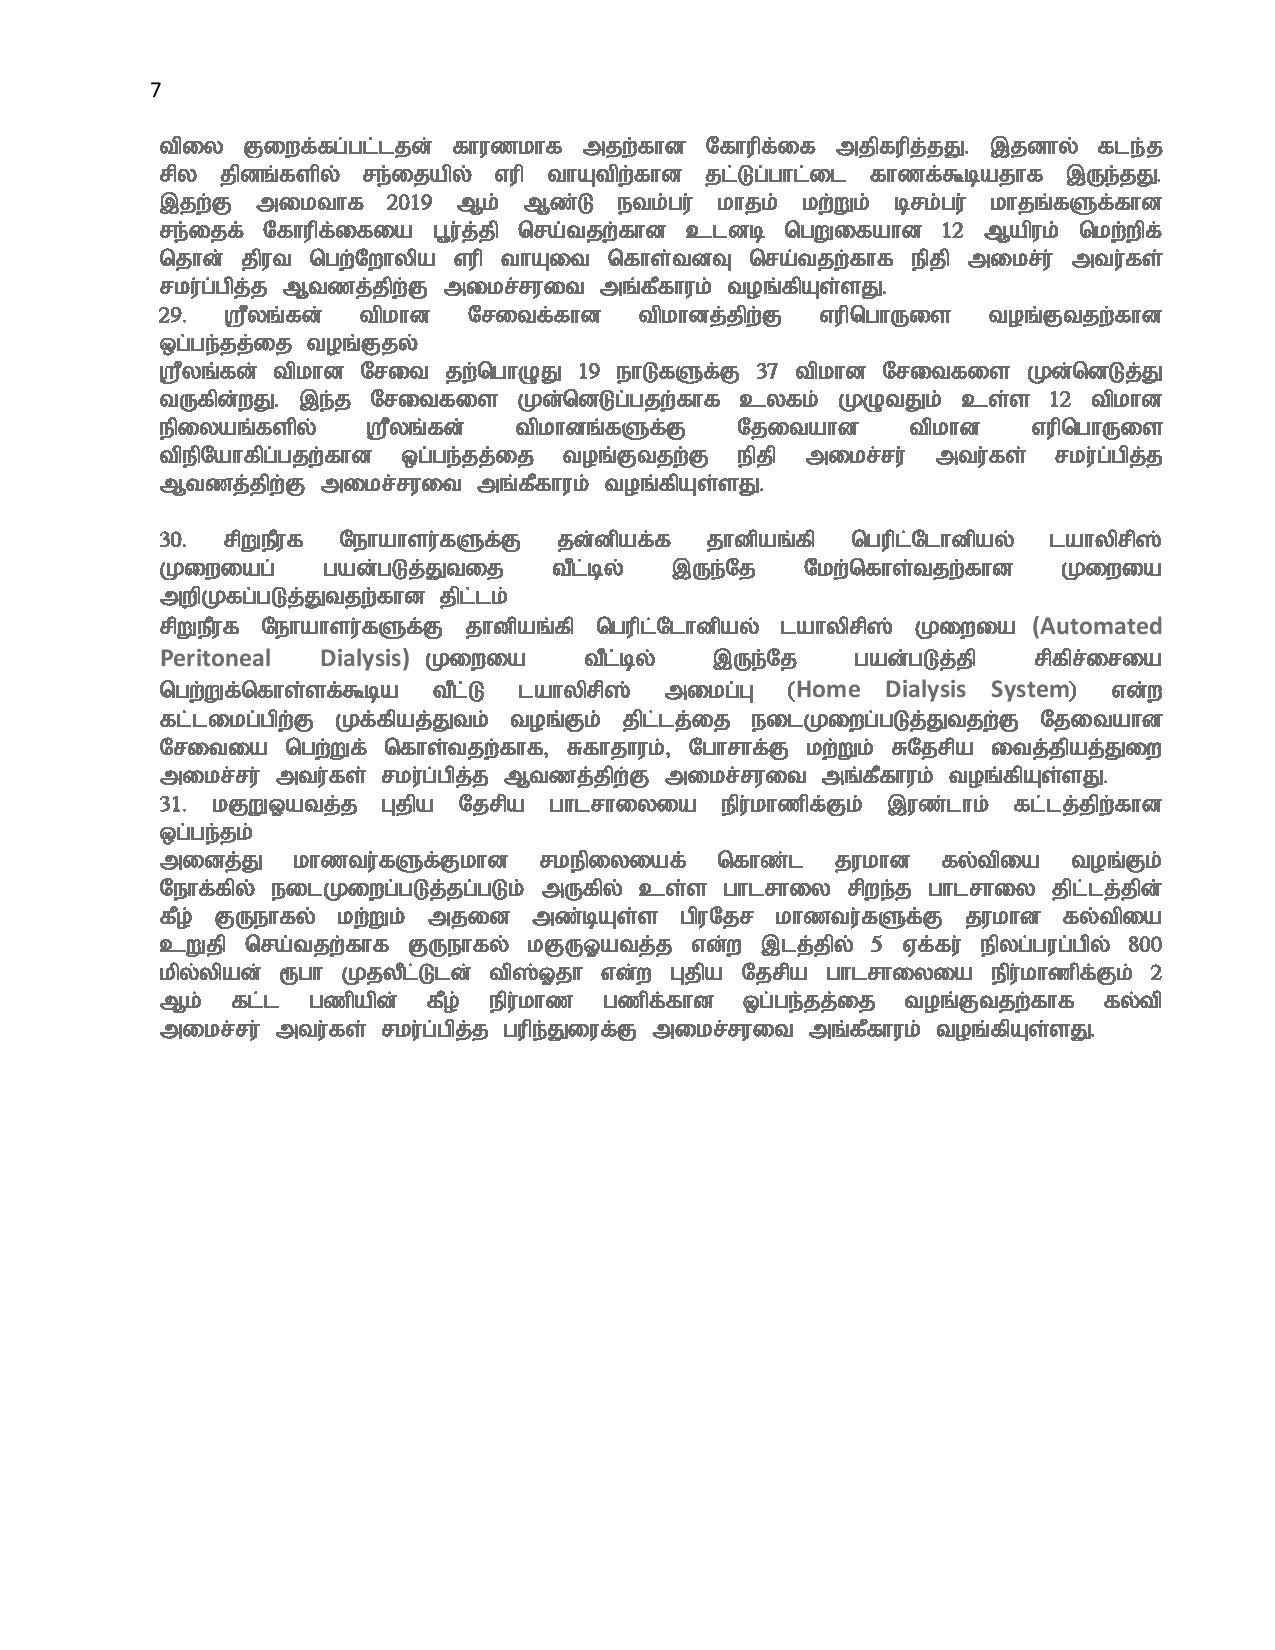 Cabinet Decisions on 05.11.2019 Tamil page 007